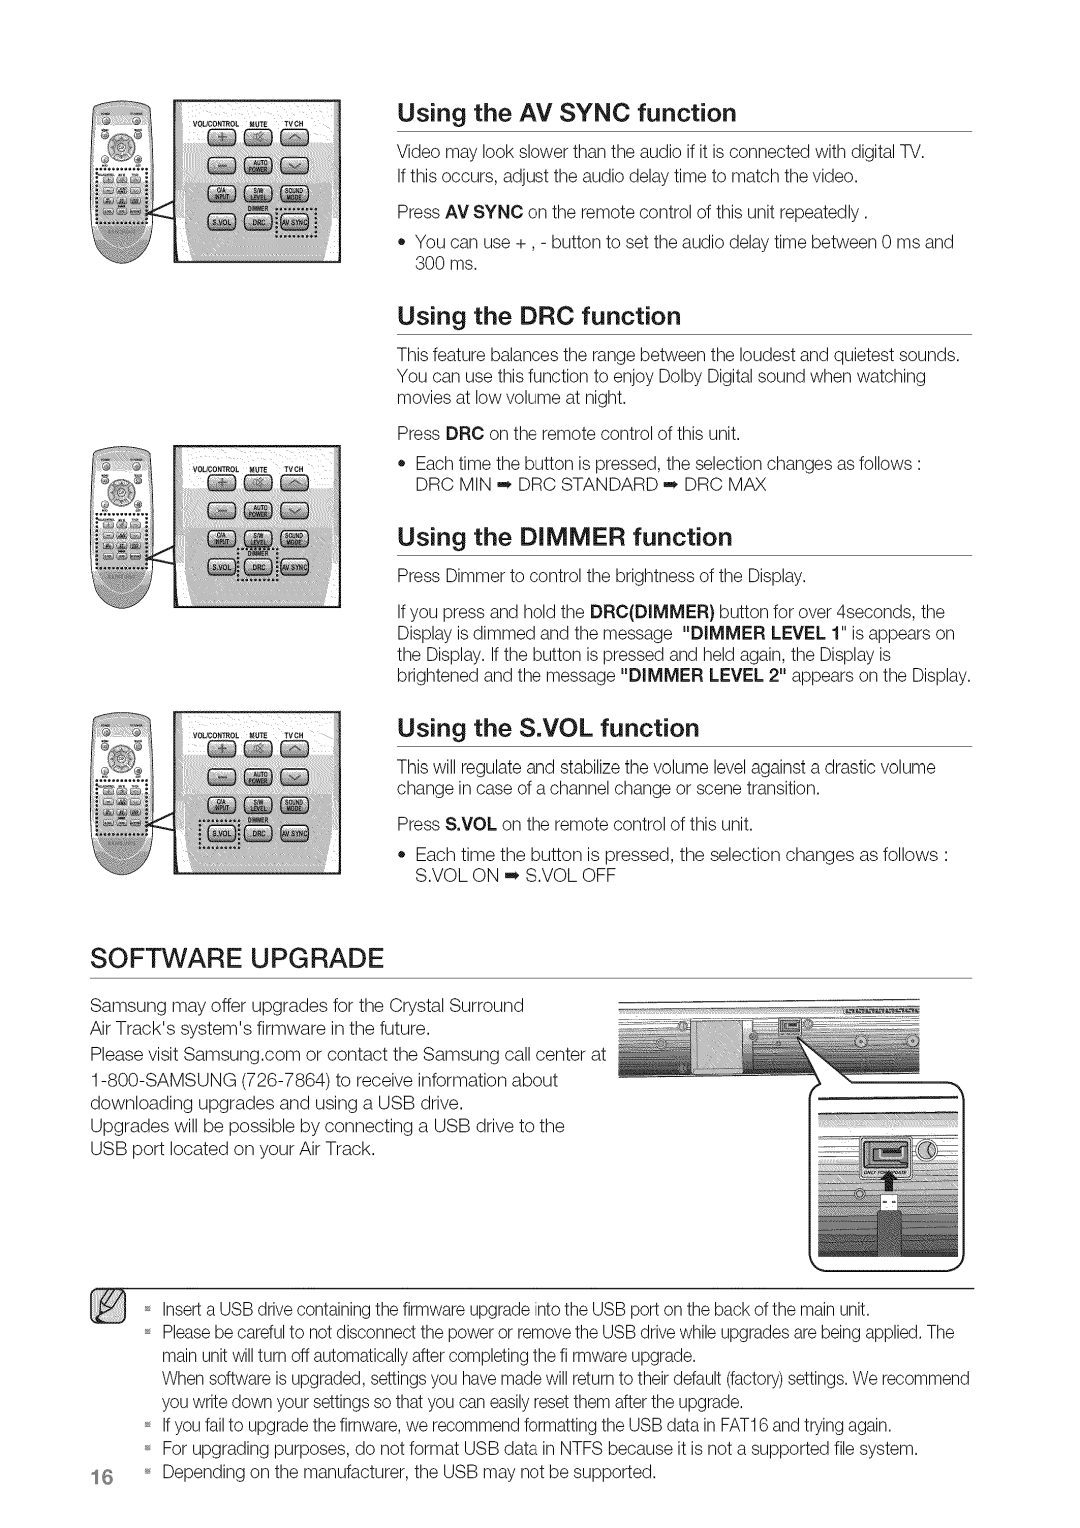 Samsung HW-C450 manual Software Upgrade, Using the AV SYNC function, Using the DRC function, Using the DIMMER function 